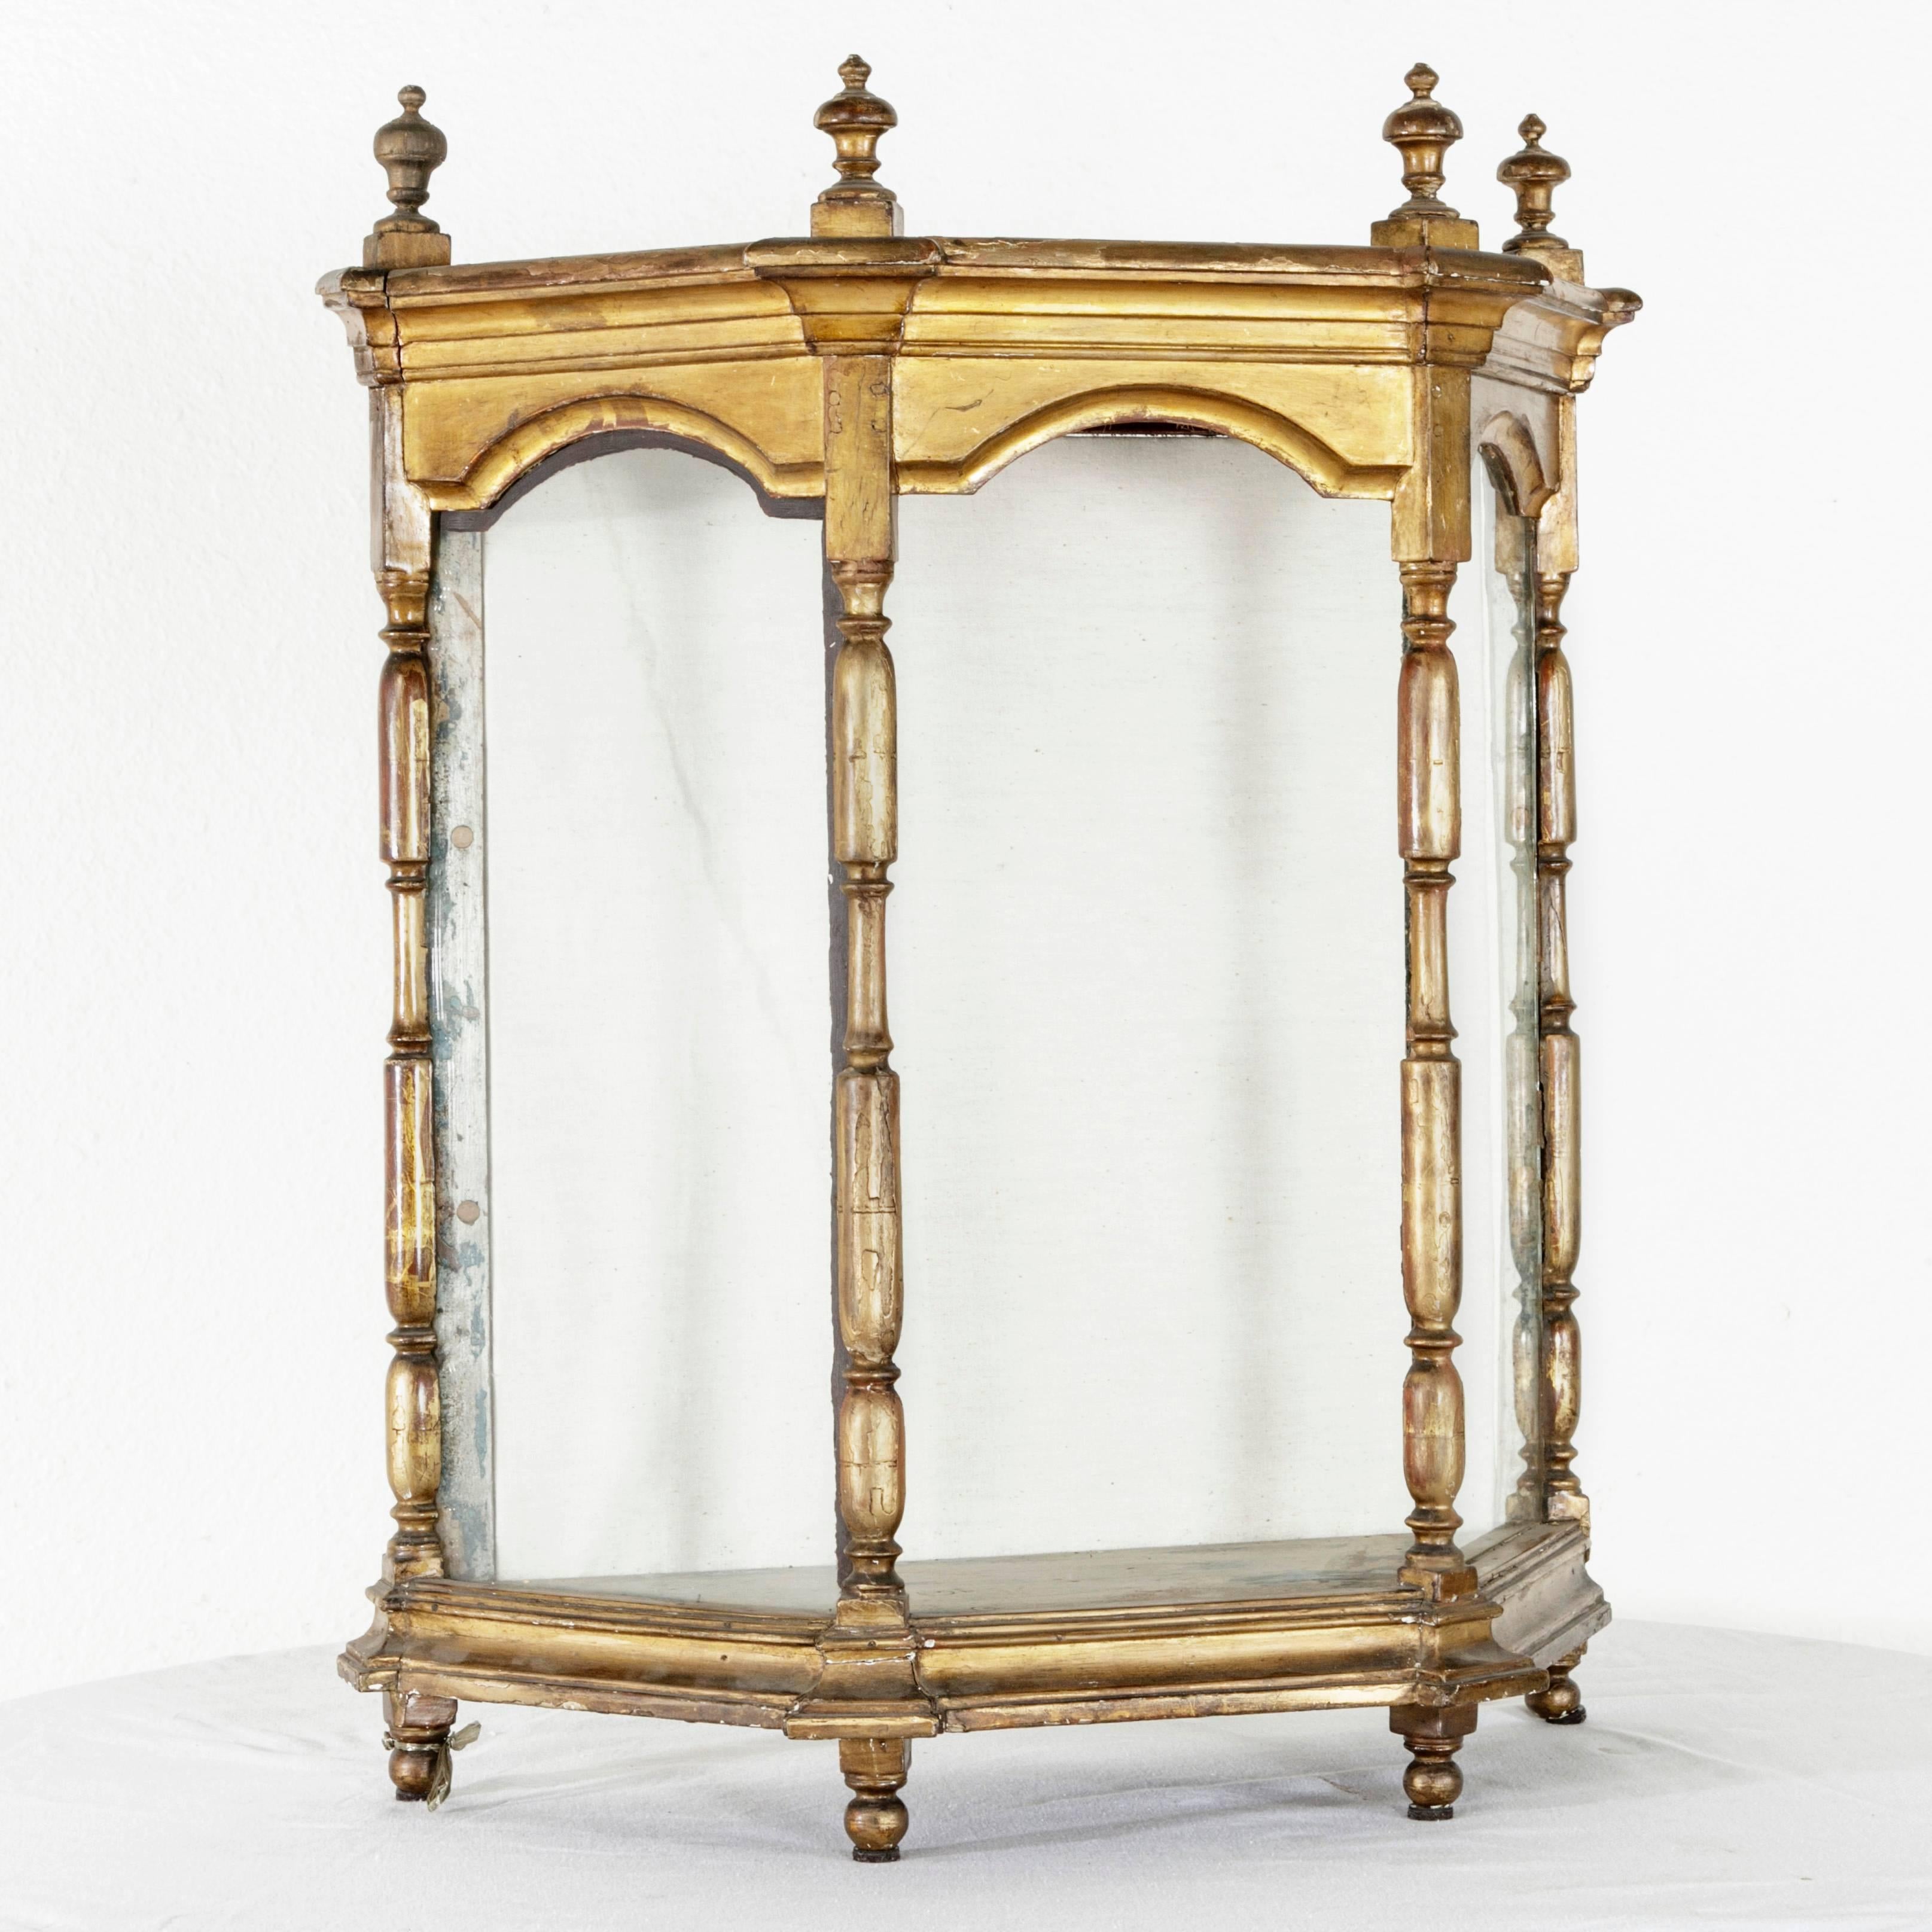 This 19th century giltwood vitrine originally hails from a French church in the Ile de France region where it originally displayed a small religious statue. Its flat back allows it to be hung upon the wall while its four ball feet support it when